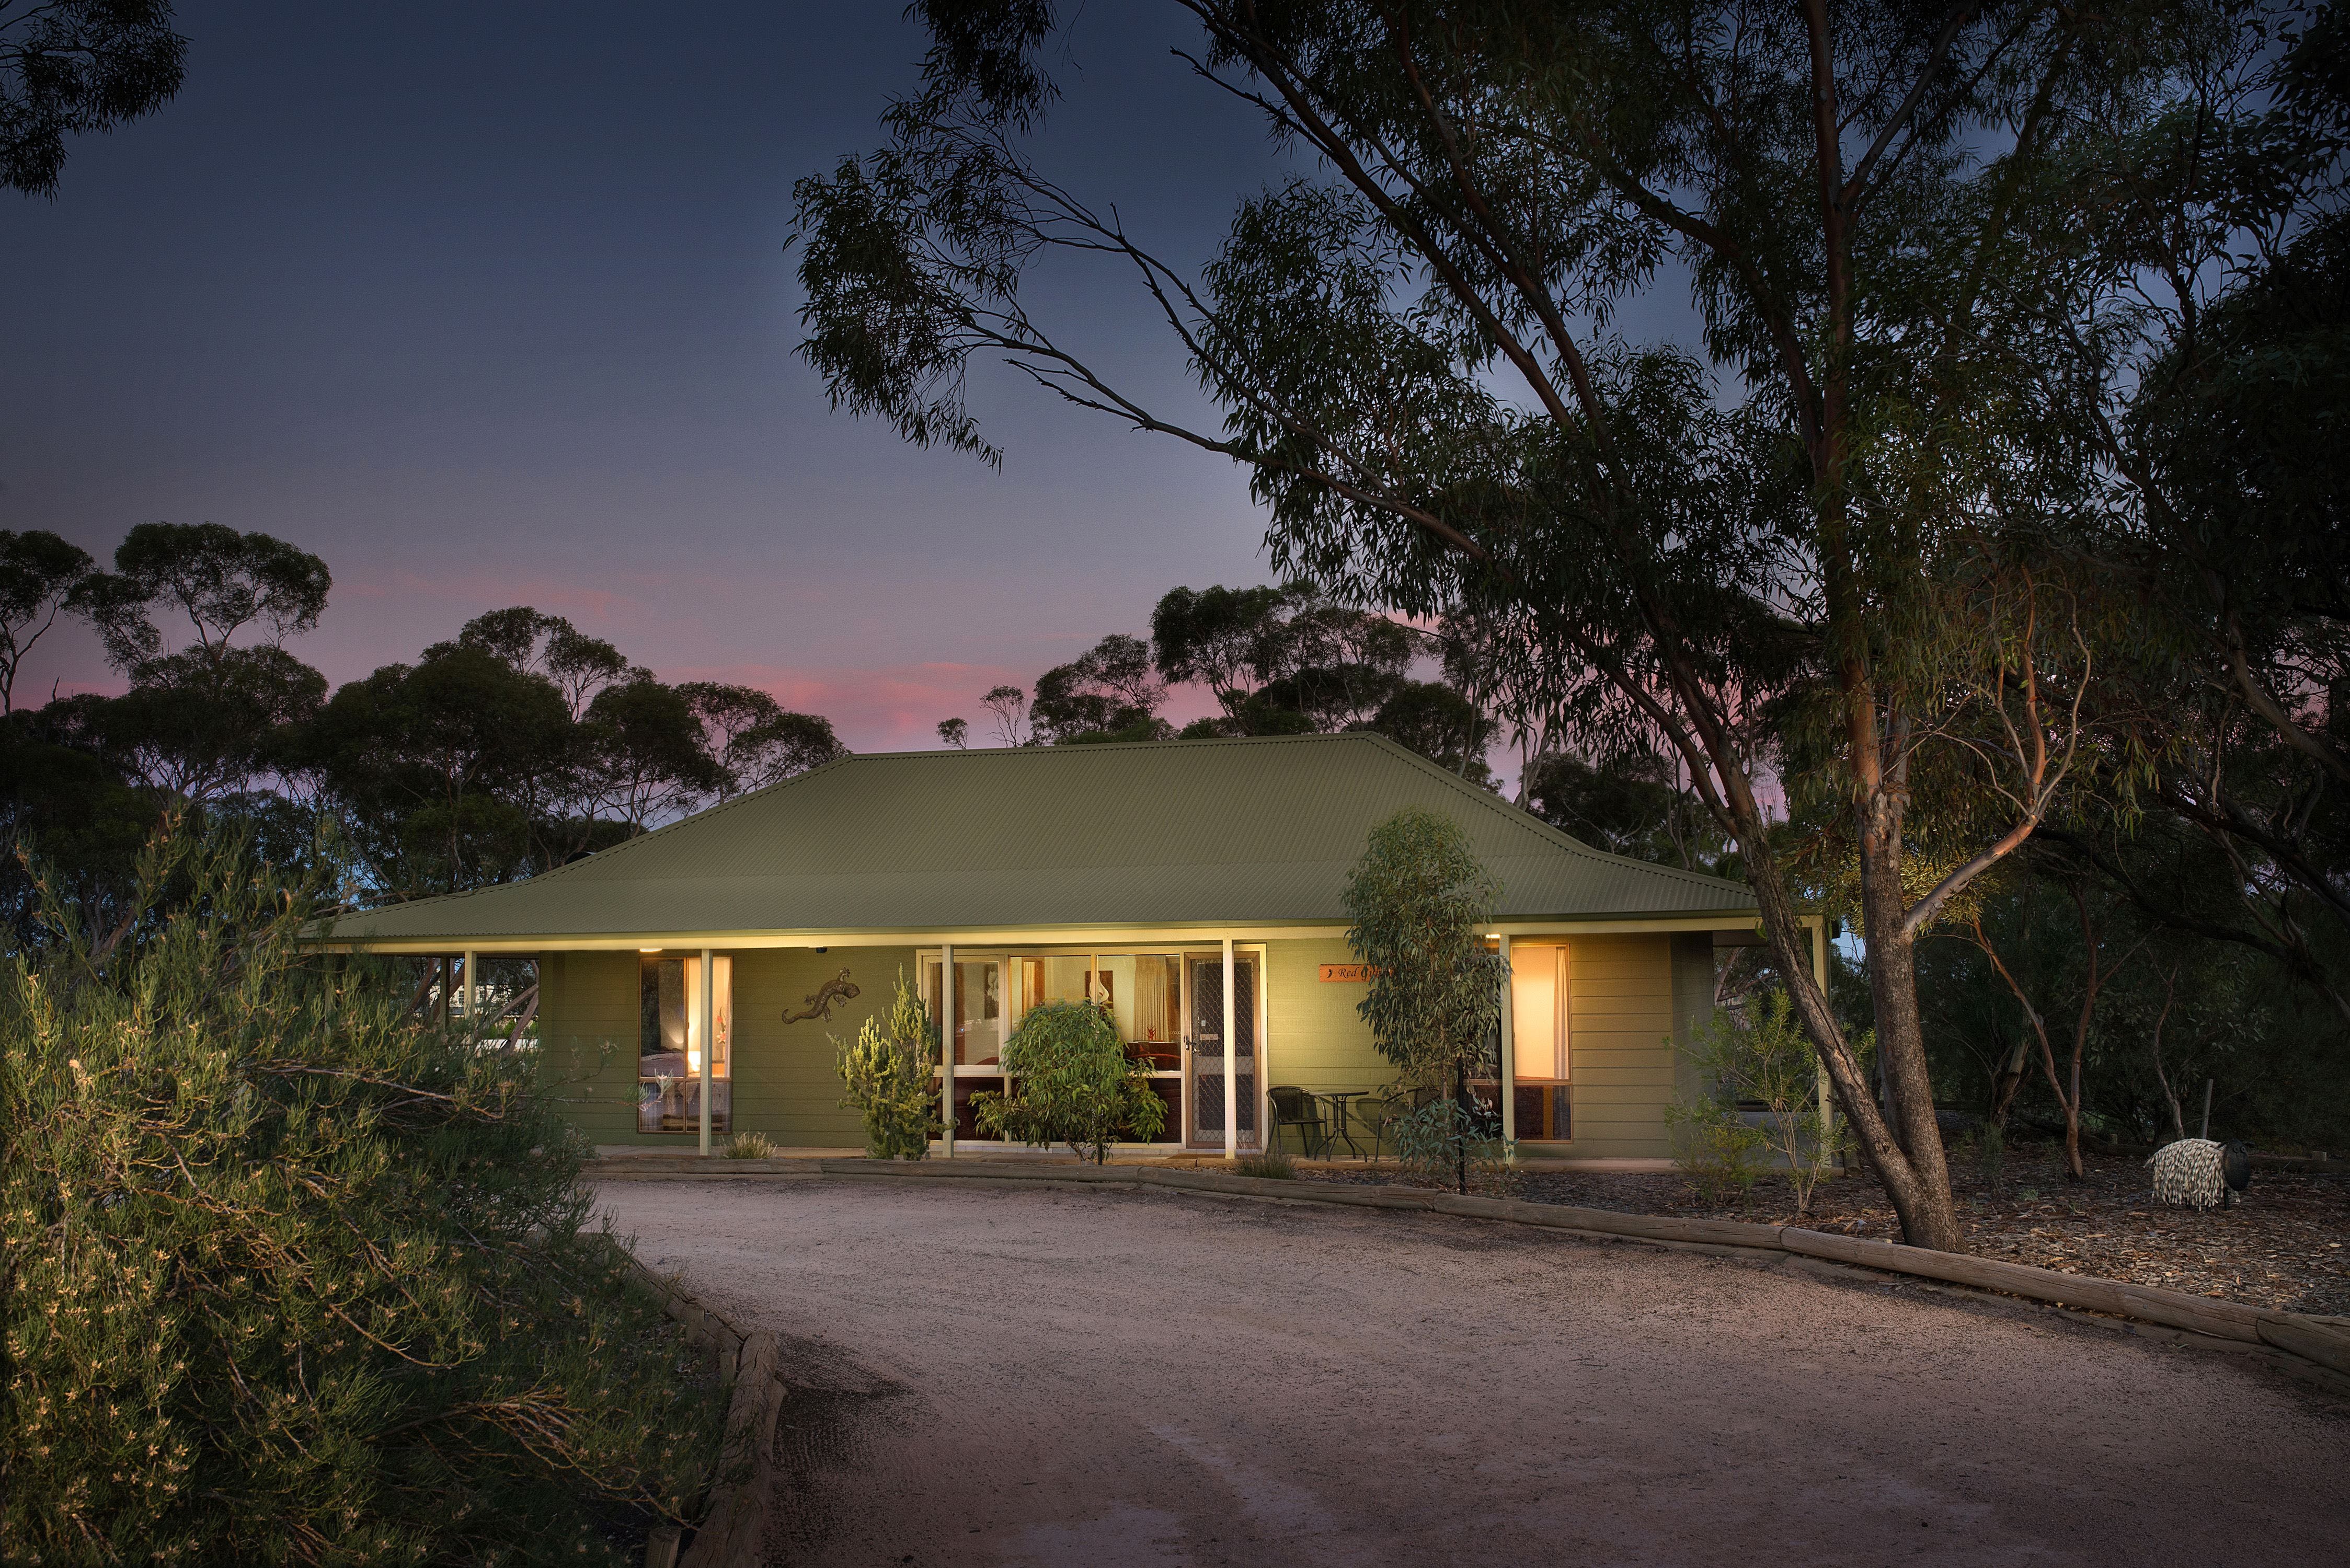 Riverbush Cottages - Coogee Beach Accommodation